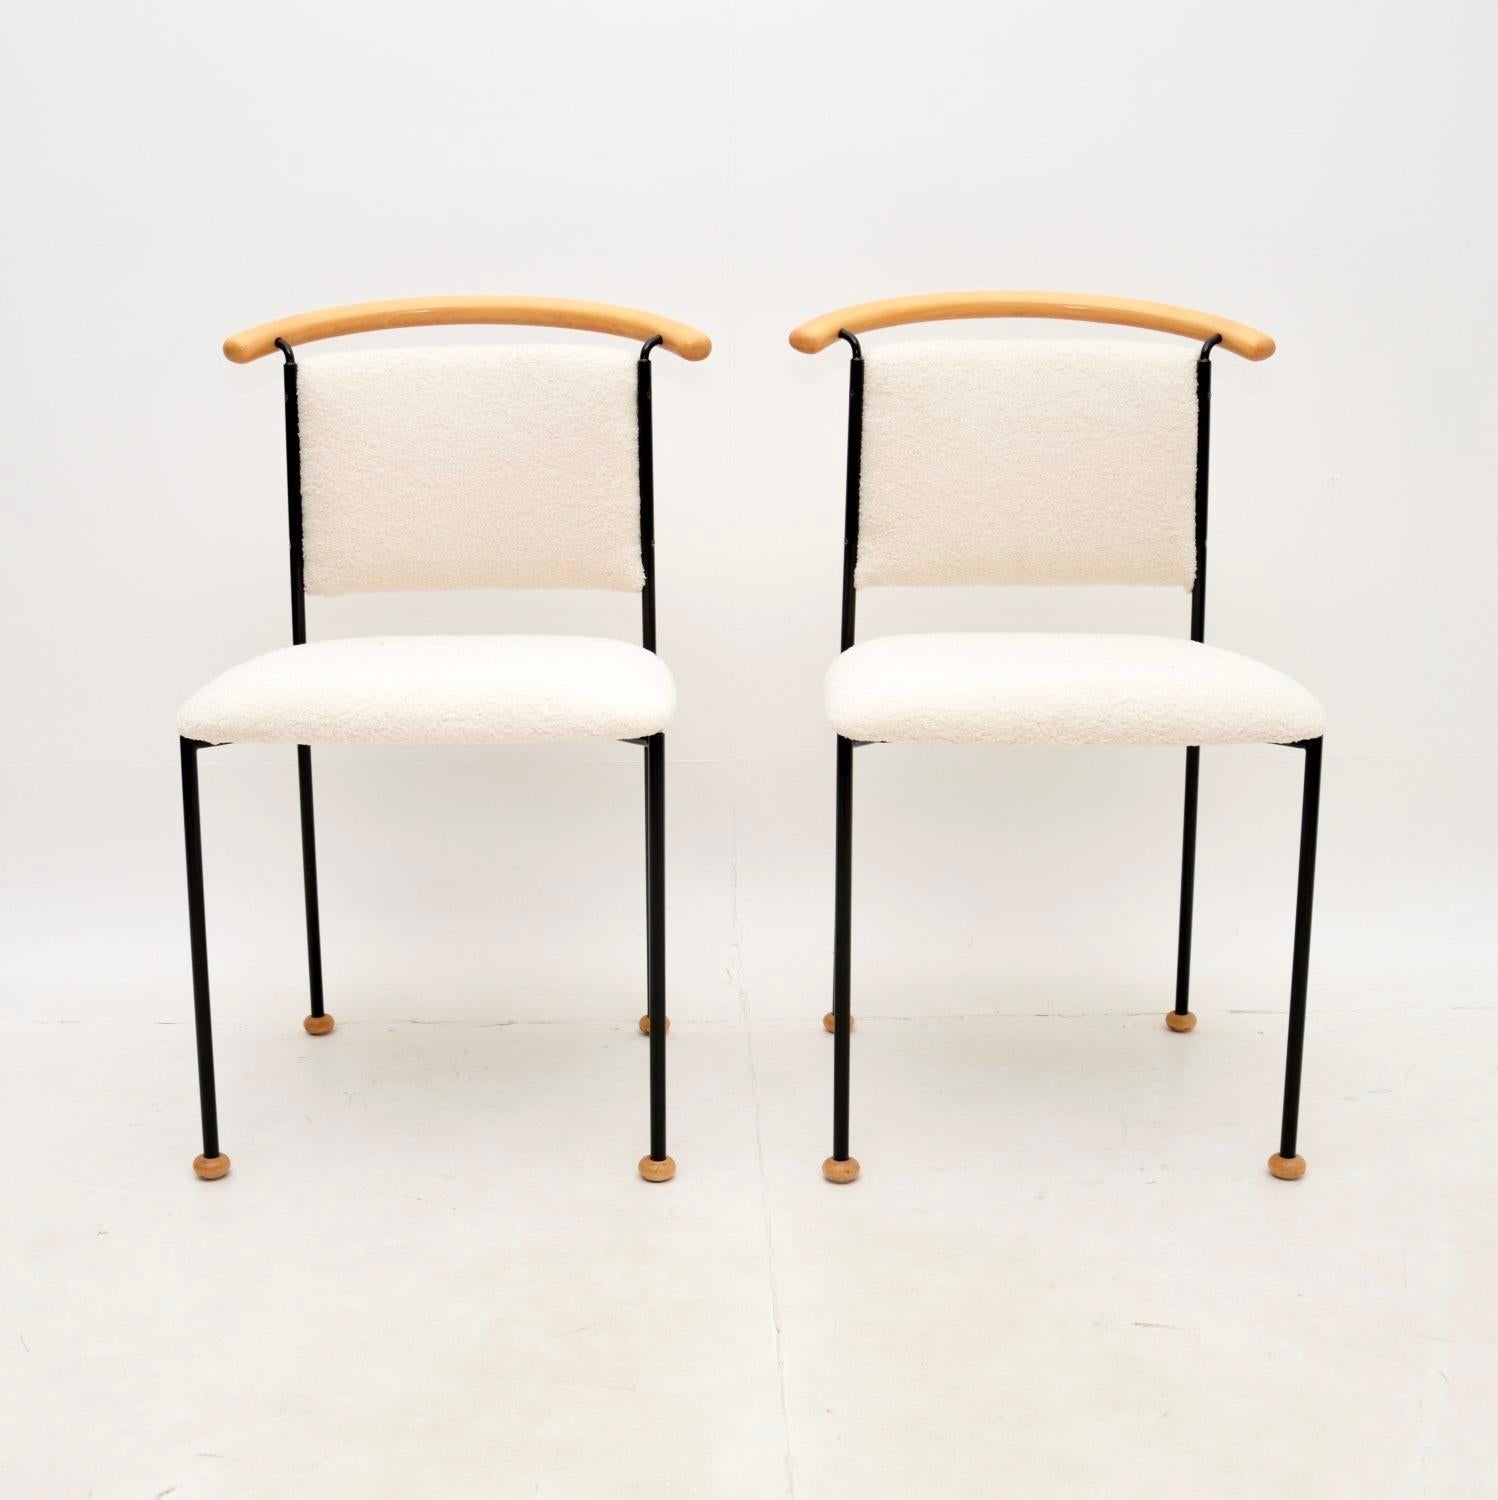 A very interesting and stylish pair of vintage Italian side chairs. They were made in Italy and date from the 1970-80’s.

They are of superb quality, with a quirky and quite unusual design. The black steel frames have curved wood back rests and sit